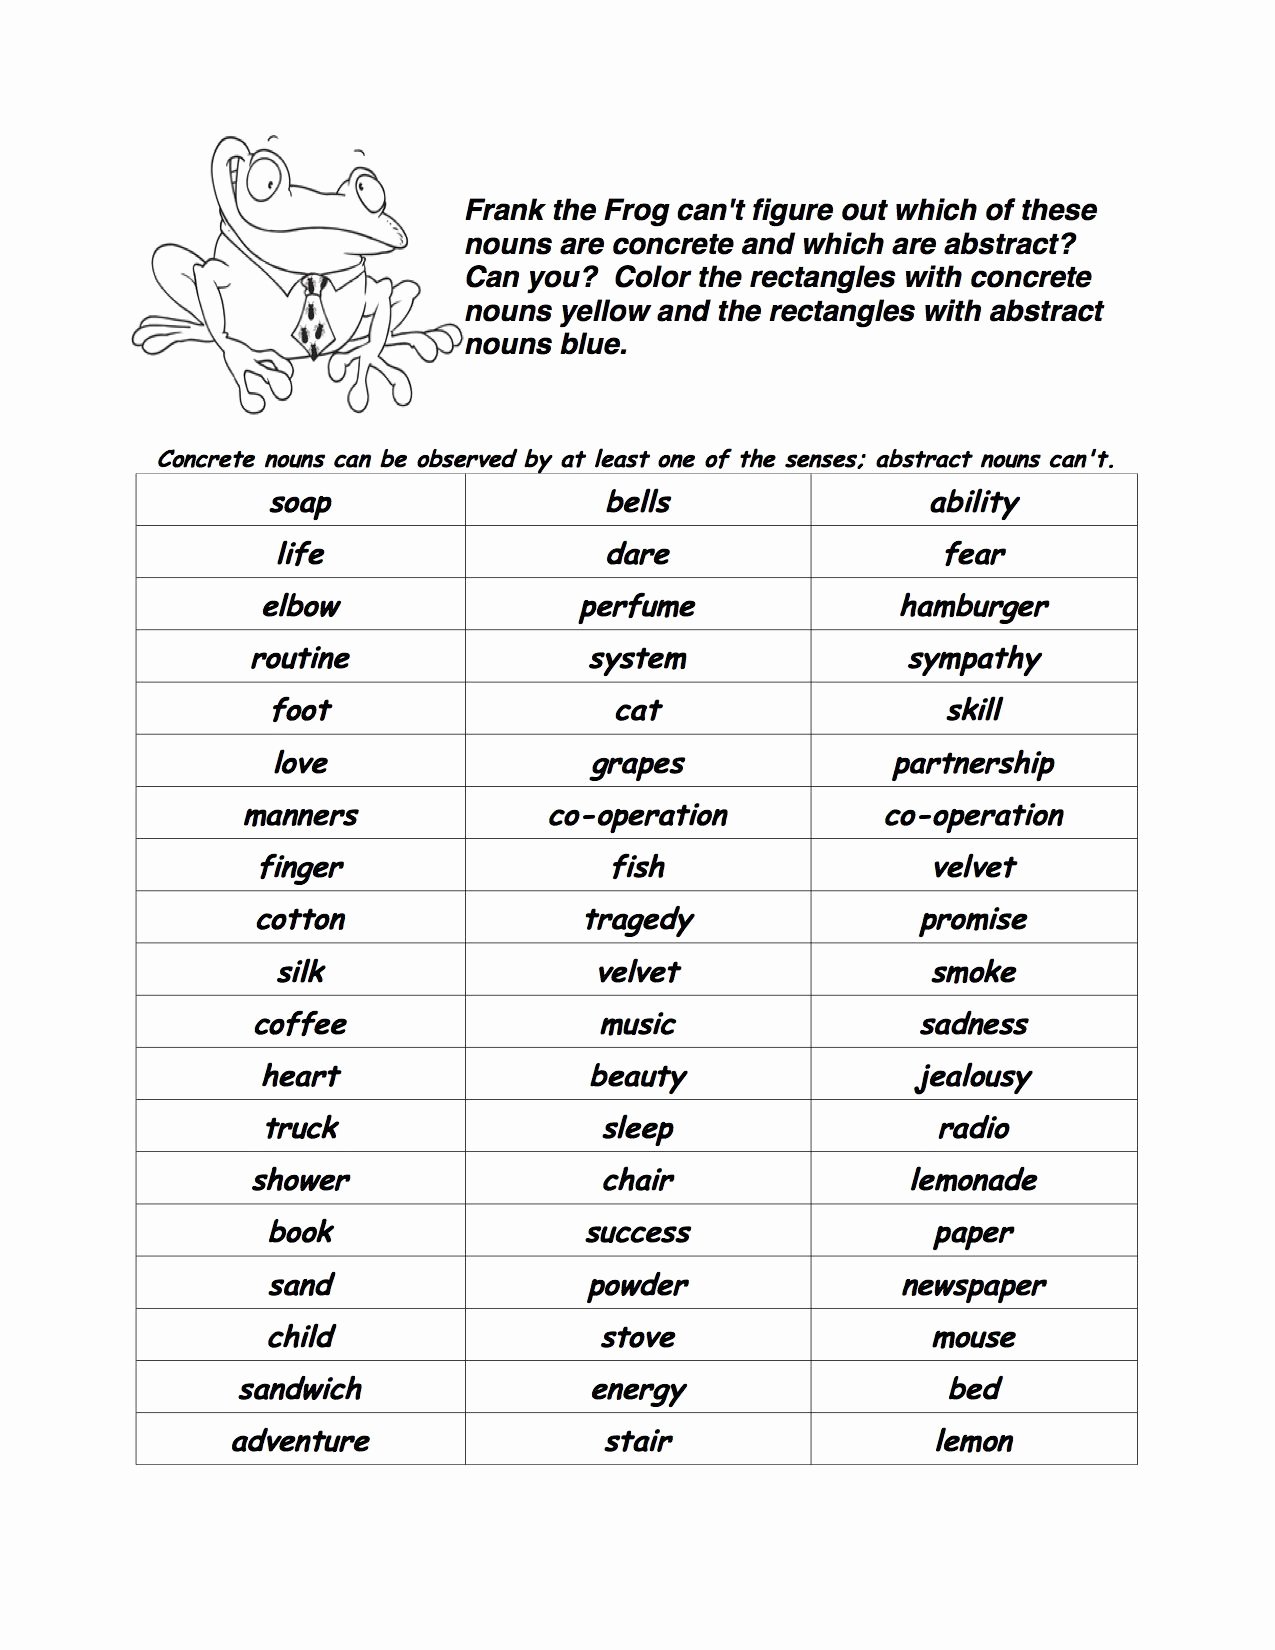 Concrete and Abstract Nouns Worksheet Beautiful Concrete and Abstract Nouns Print Out A Concrete and